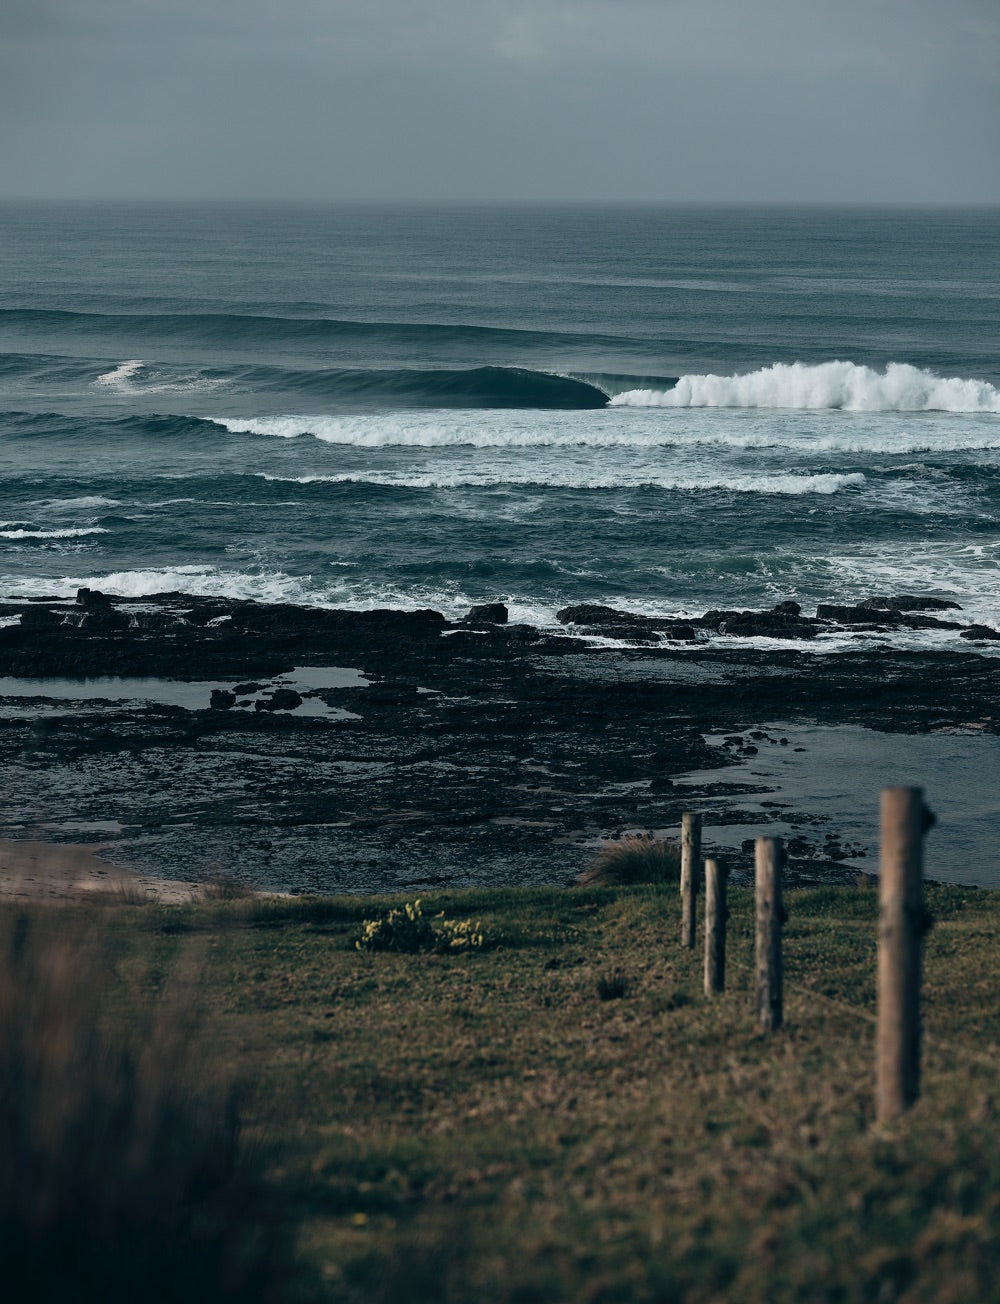 Sense of adventure: A view of a perfect barrelling wave from a cliff top